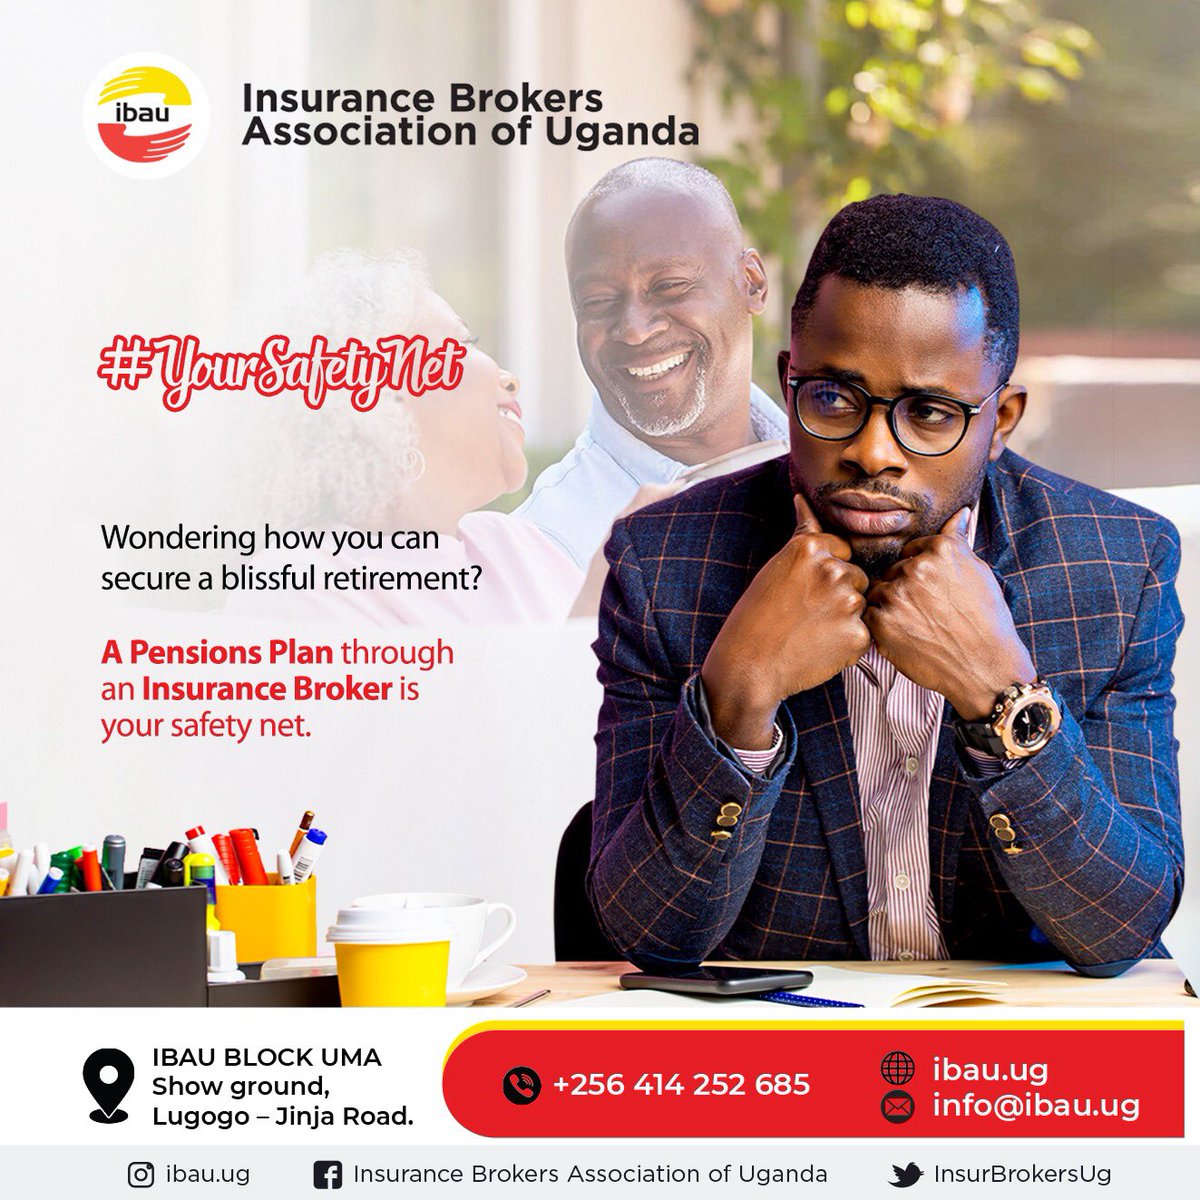 #YourSafetyNet

While you go about your present life, remember to secure your retirement (old) age.

This you can do by taking out a Pension Plan with the help of an Insurance Broker.

#IBAU #Insurance #PensionPlan #InsuranceBroker #Saveforthefuture #InsuranceCover